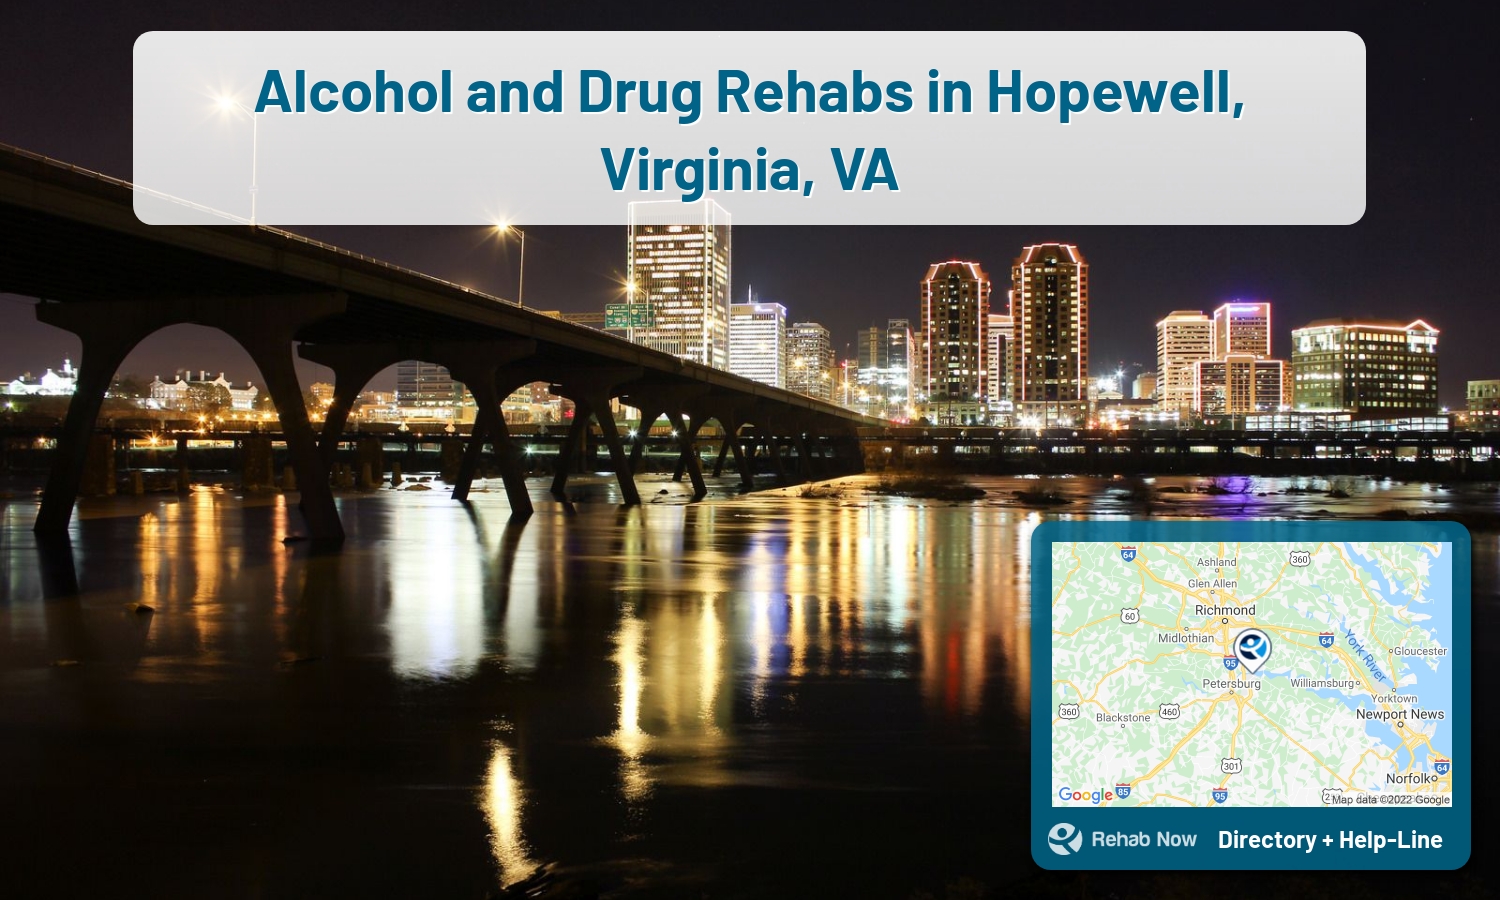 Find drug rehab and alcohol treatment services in Hopewell. Our experts help you find a center in Hopewell, Virginia